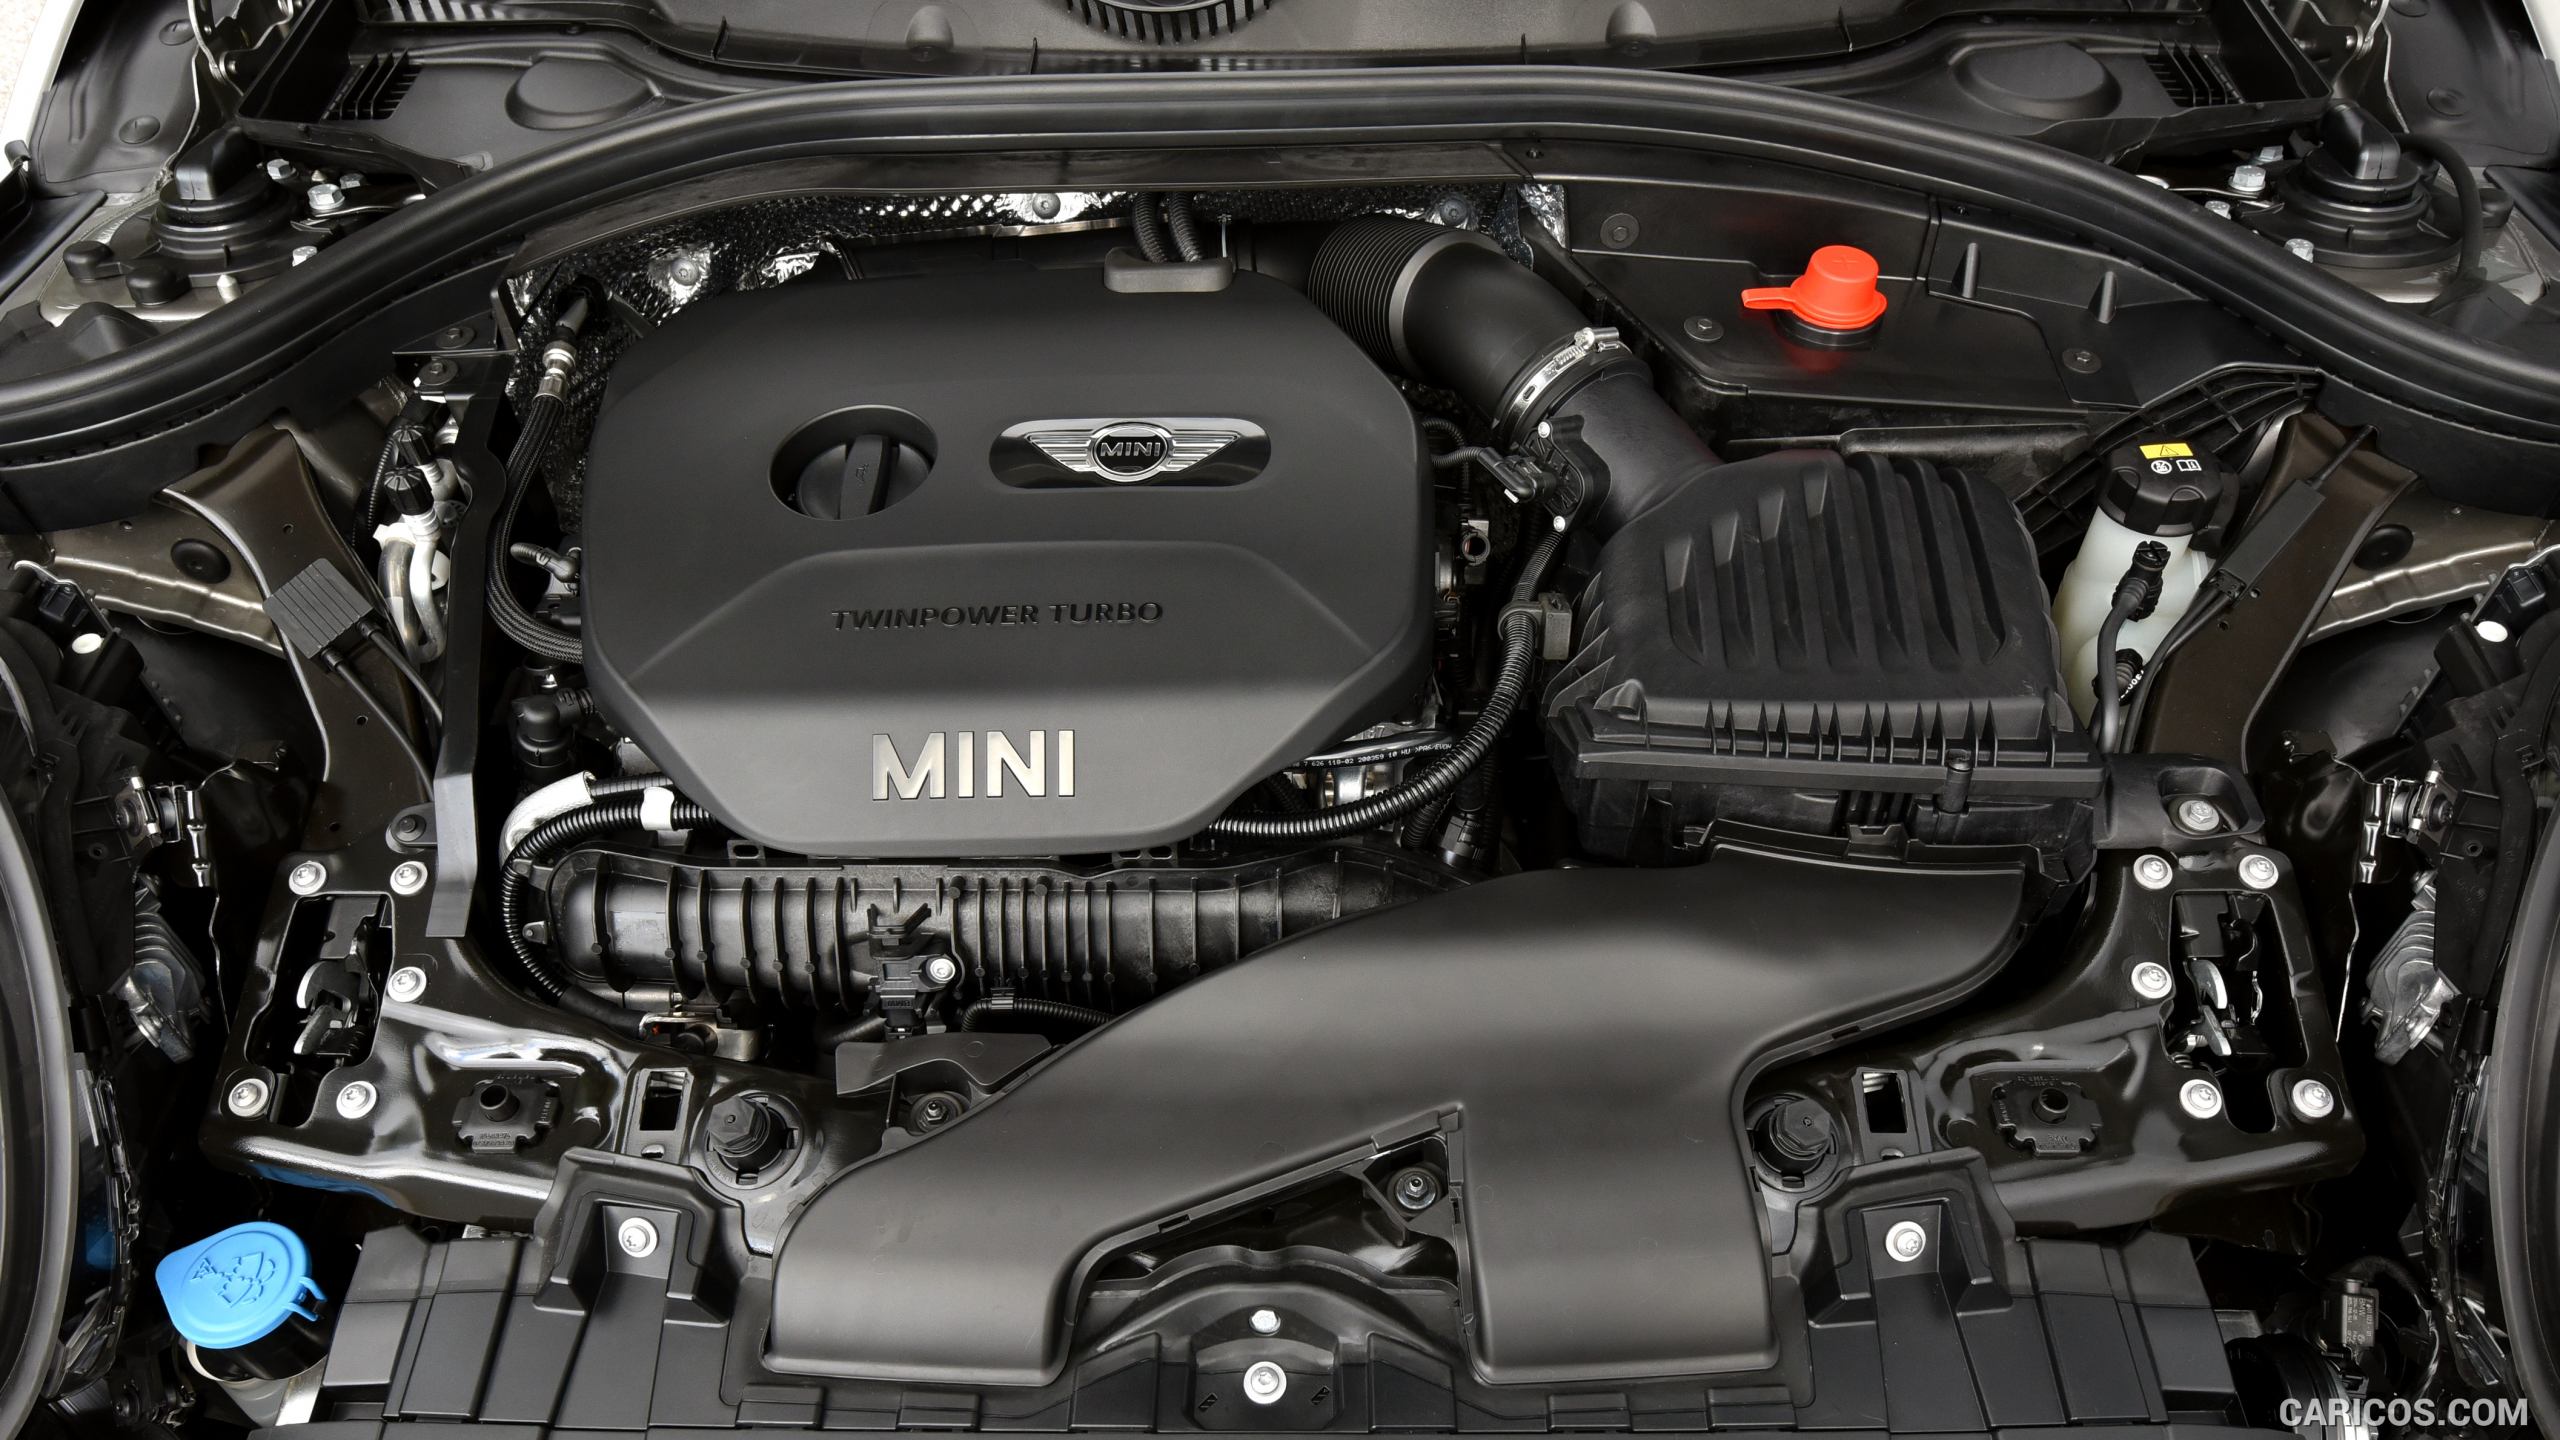 2016 MINI Cooper S Clubman in Metallic Melting Silver - Engine, #223 of 380